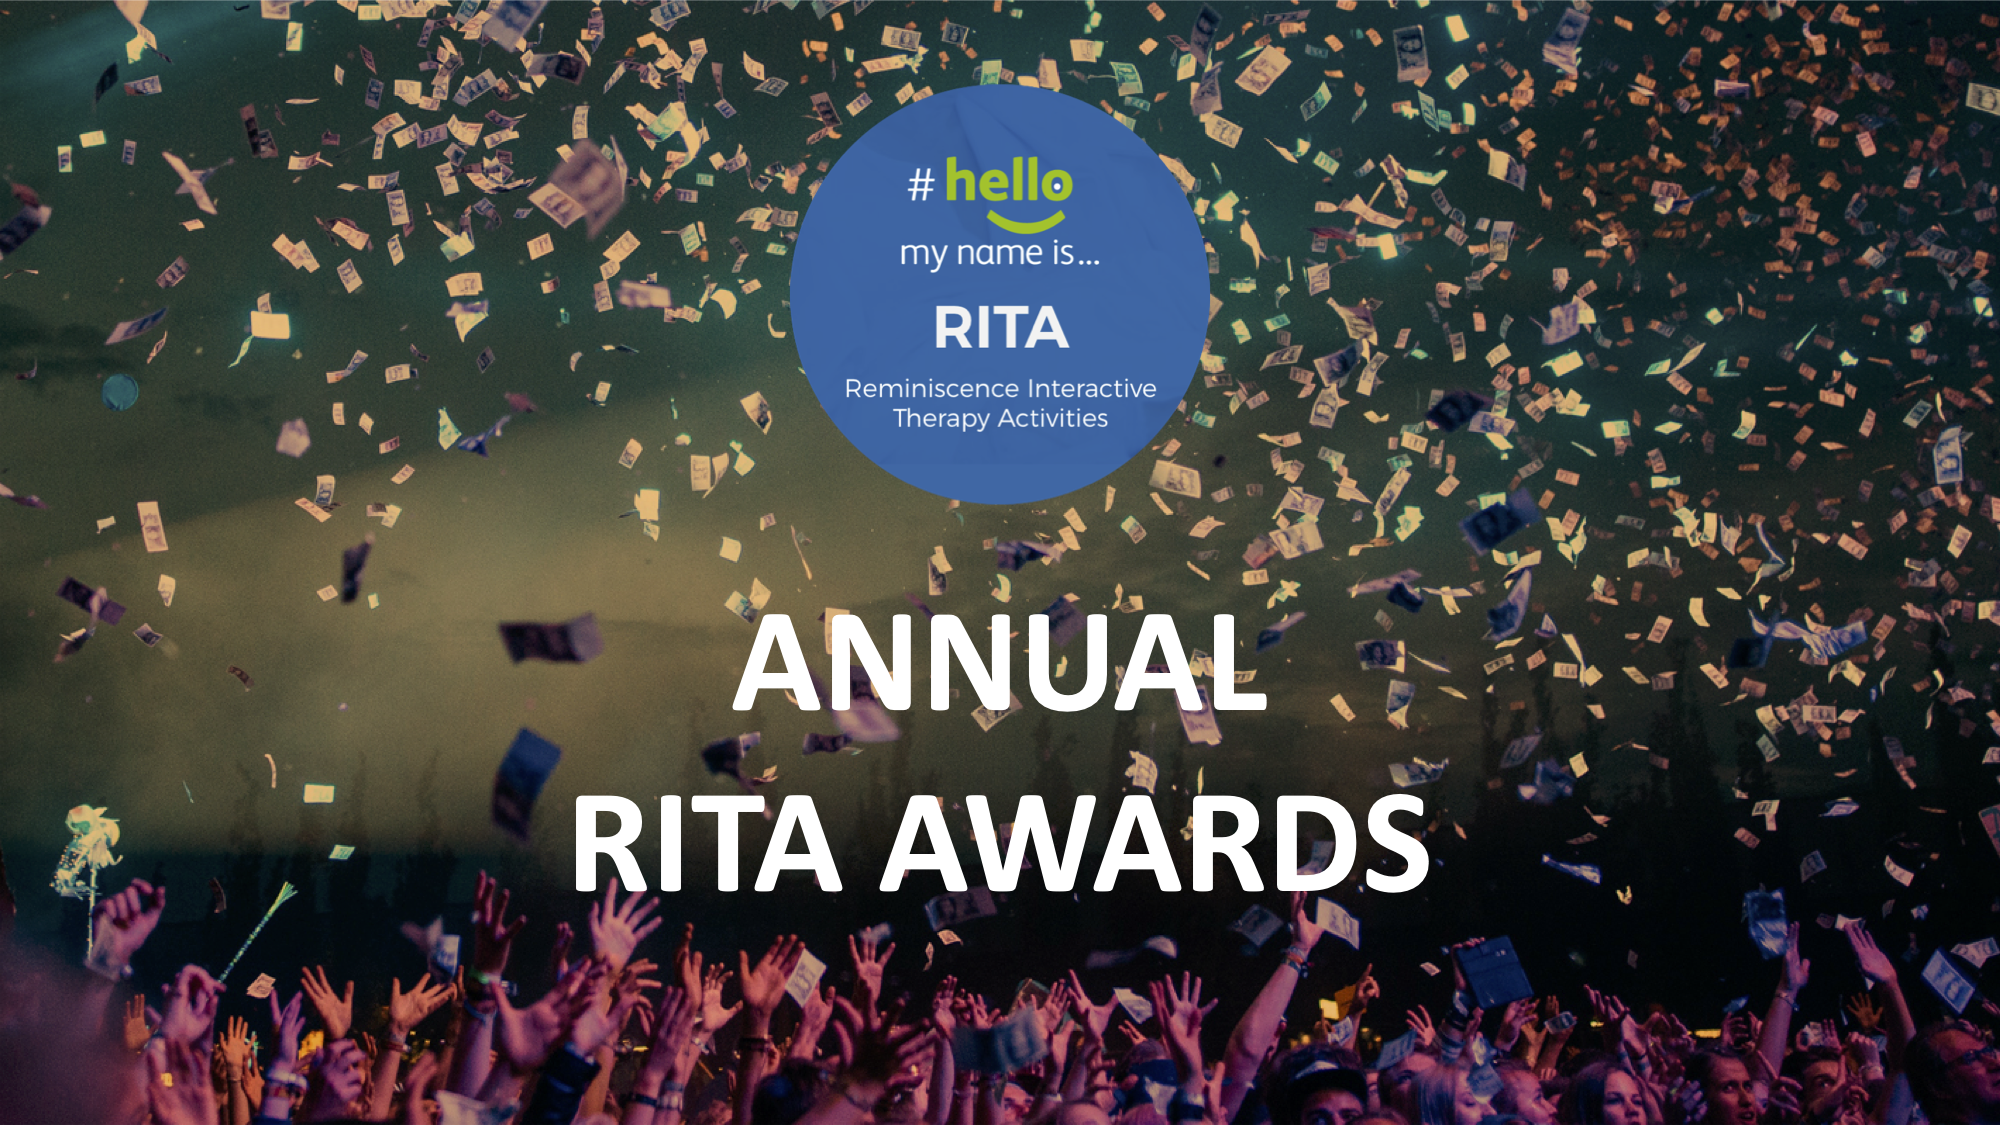 Join us at this years RITA User Group Conference and Awards!